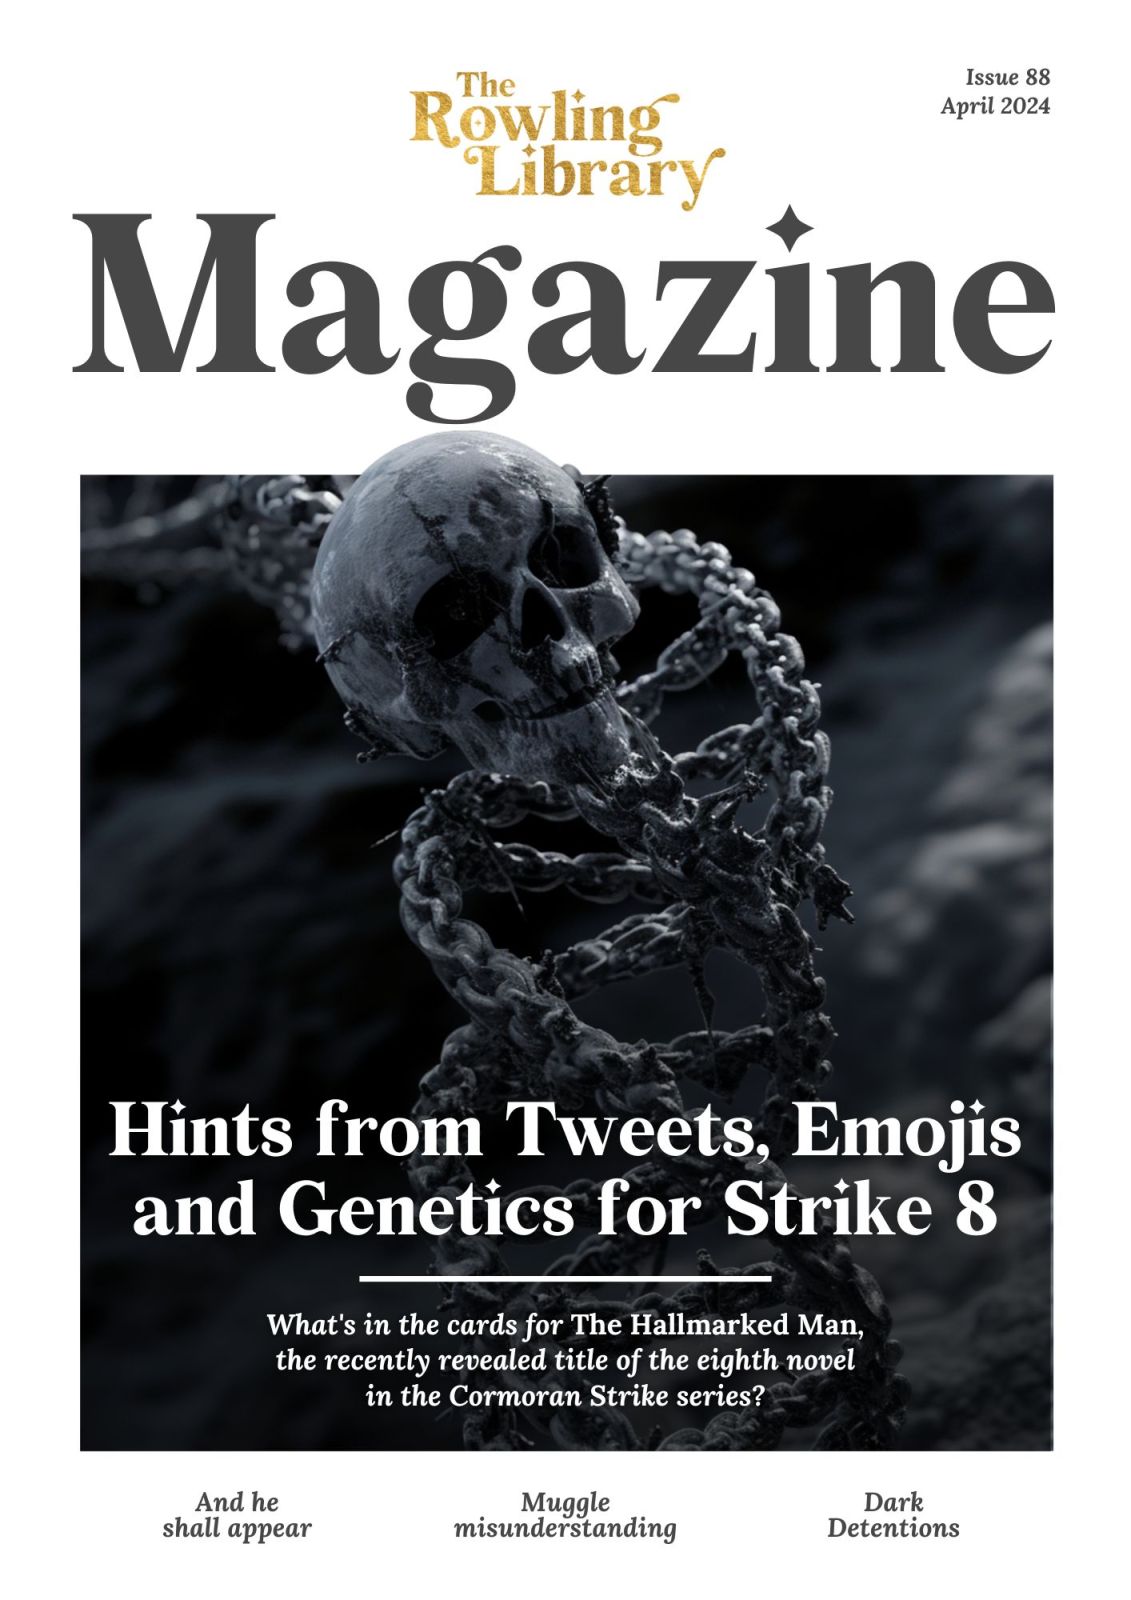 The Rowling Library Magazine #88 (April 2024): Hints from Tweets, Emojis and Genetics for Strike 8